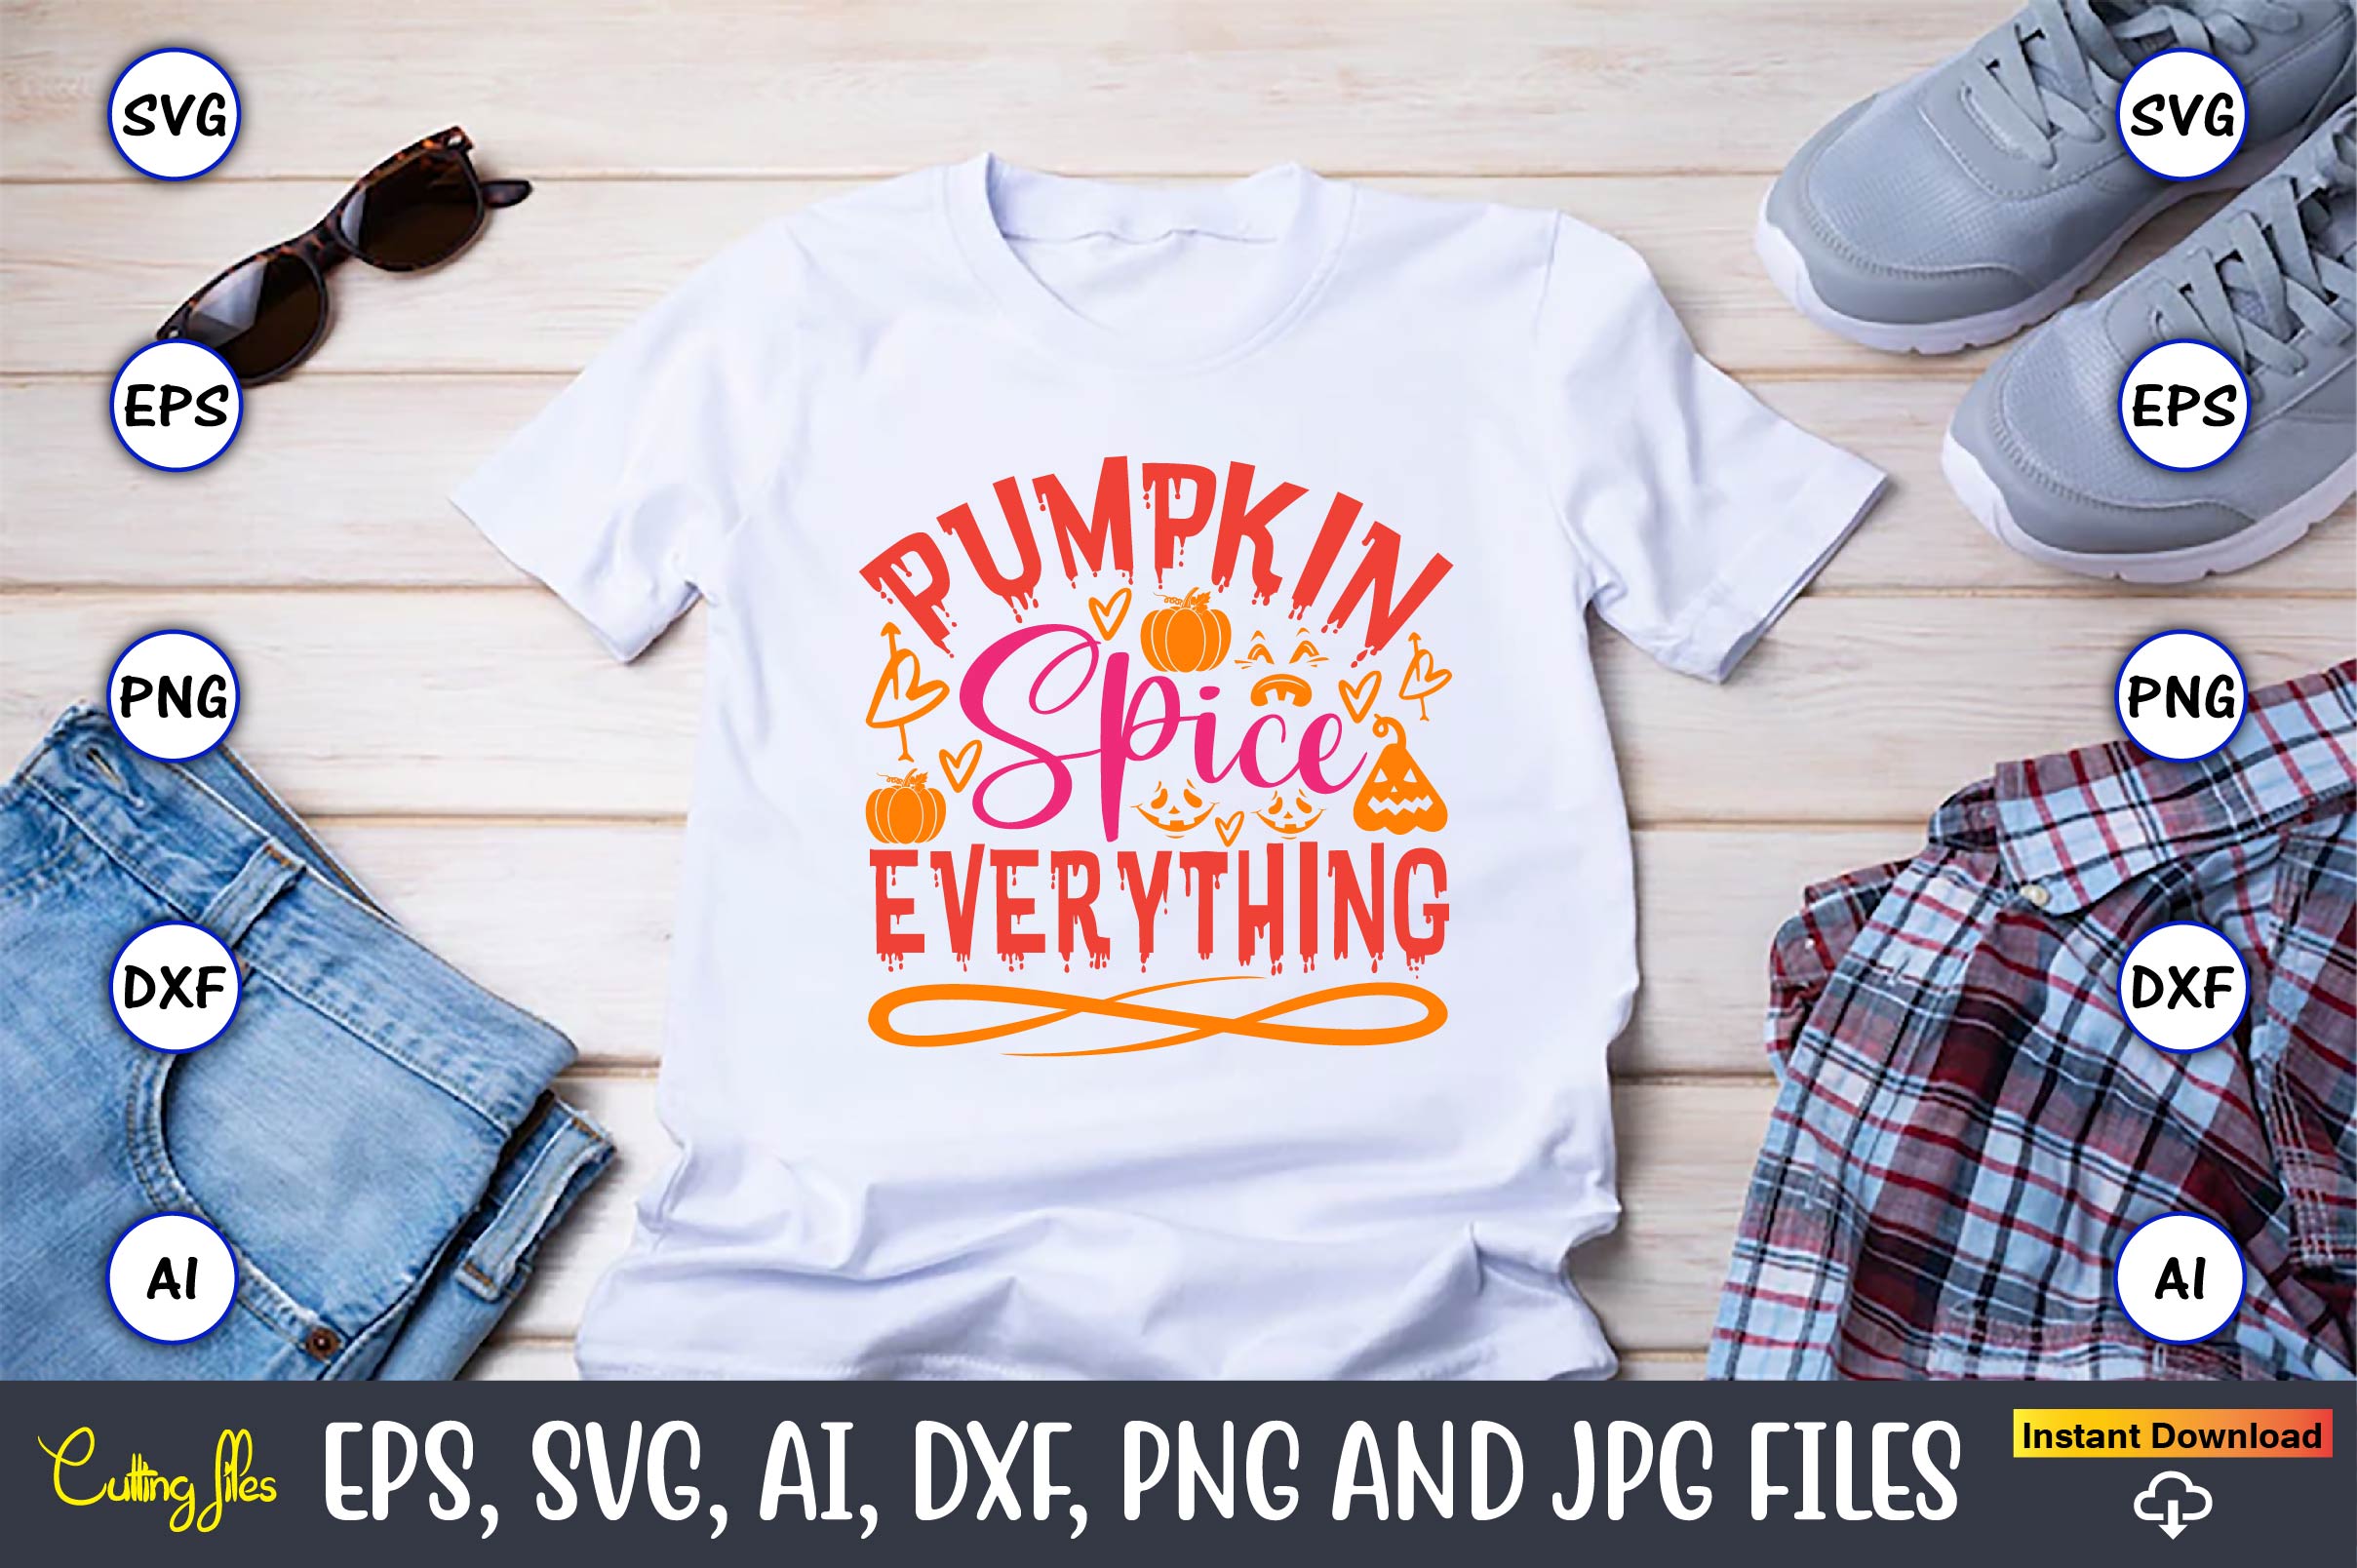 Image of a white t-shirt with a beautiful print Pumpkin spice everything.